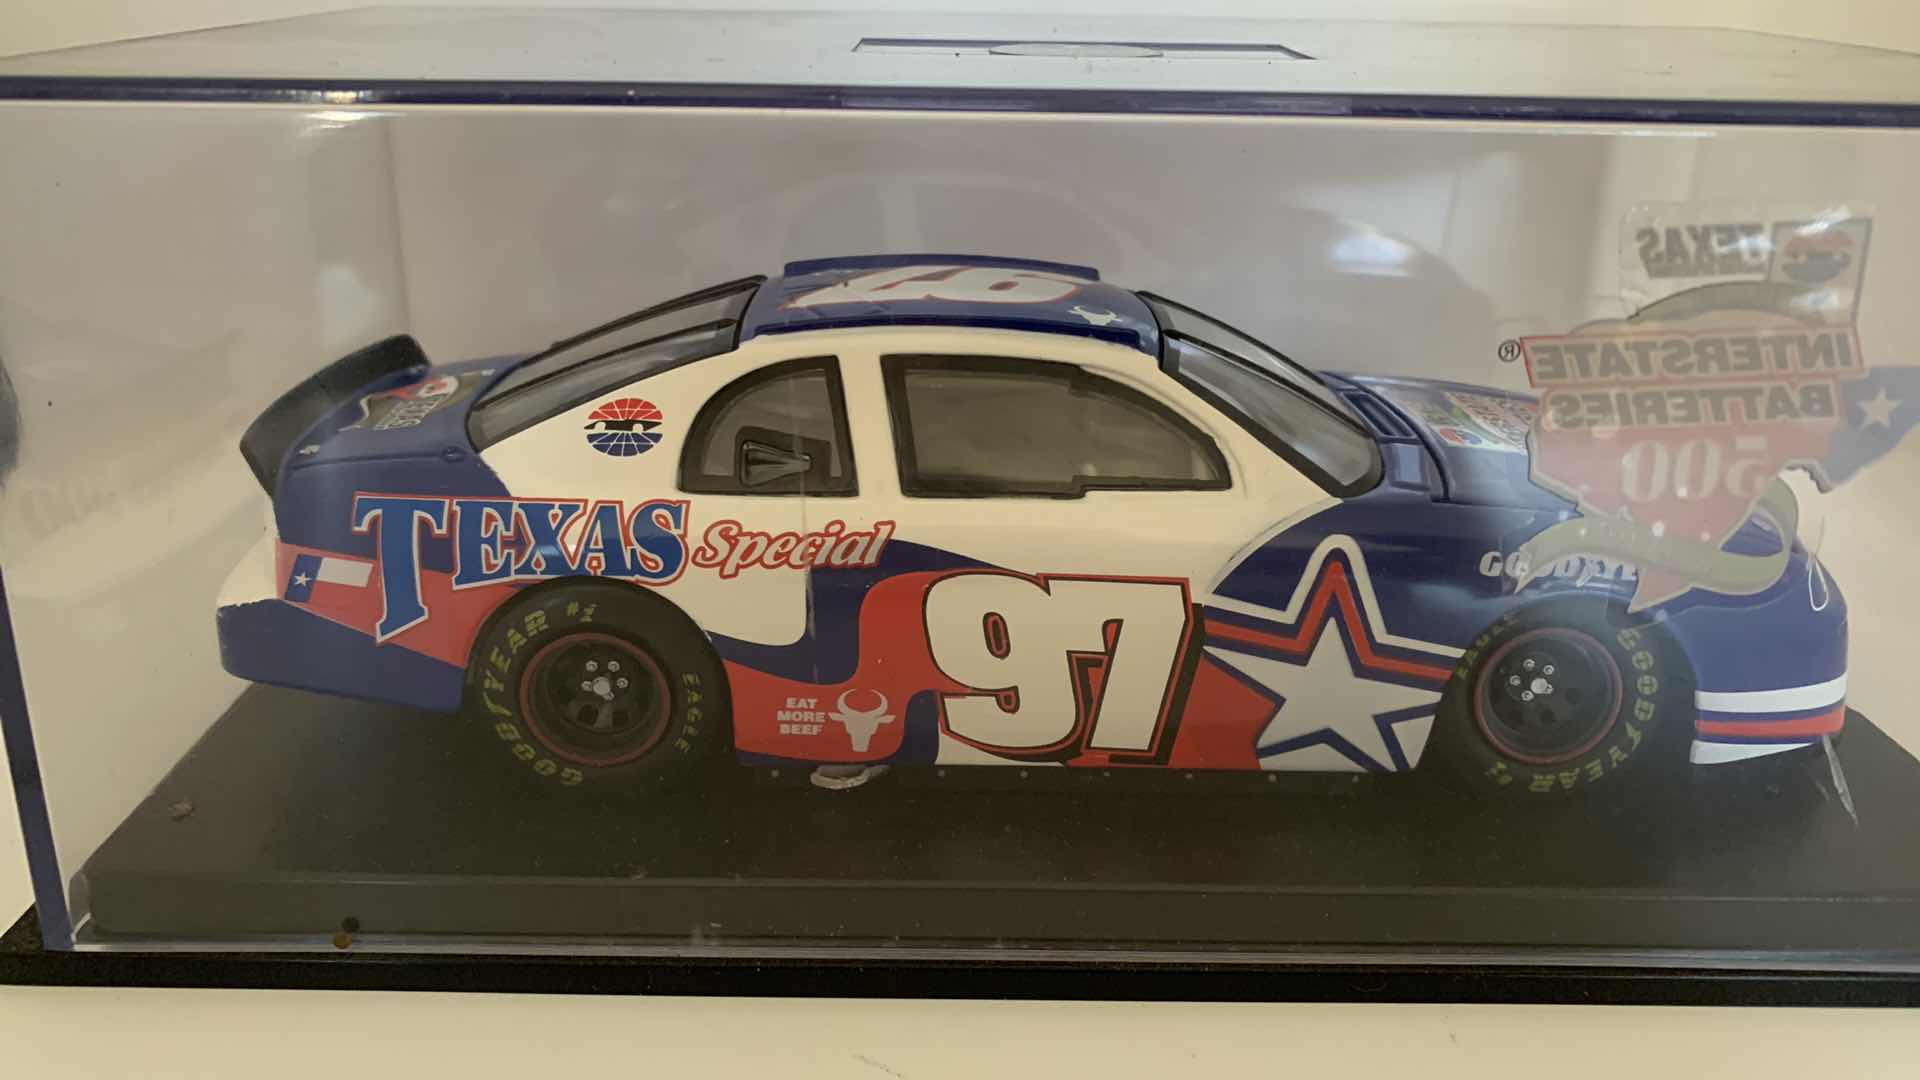 Photo 4 of SPORTS IMPRESSIONS APRIL 6, 1997 #97 TEXAS SPECIAL DIE CAST RACE CAR IN SHOW CASE.